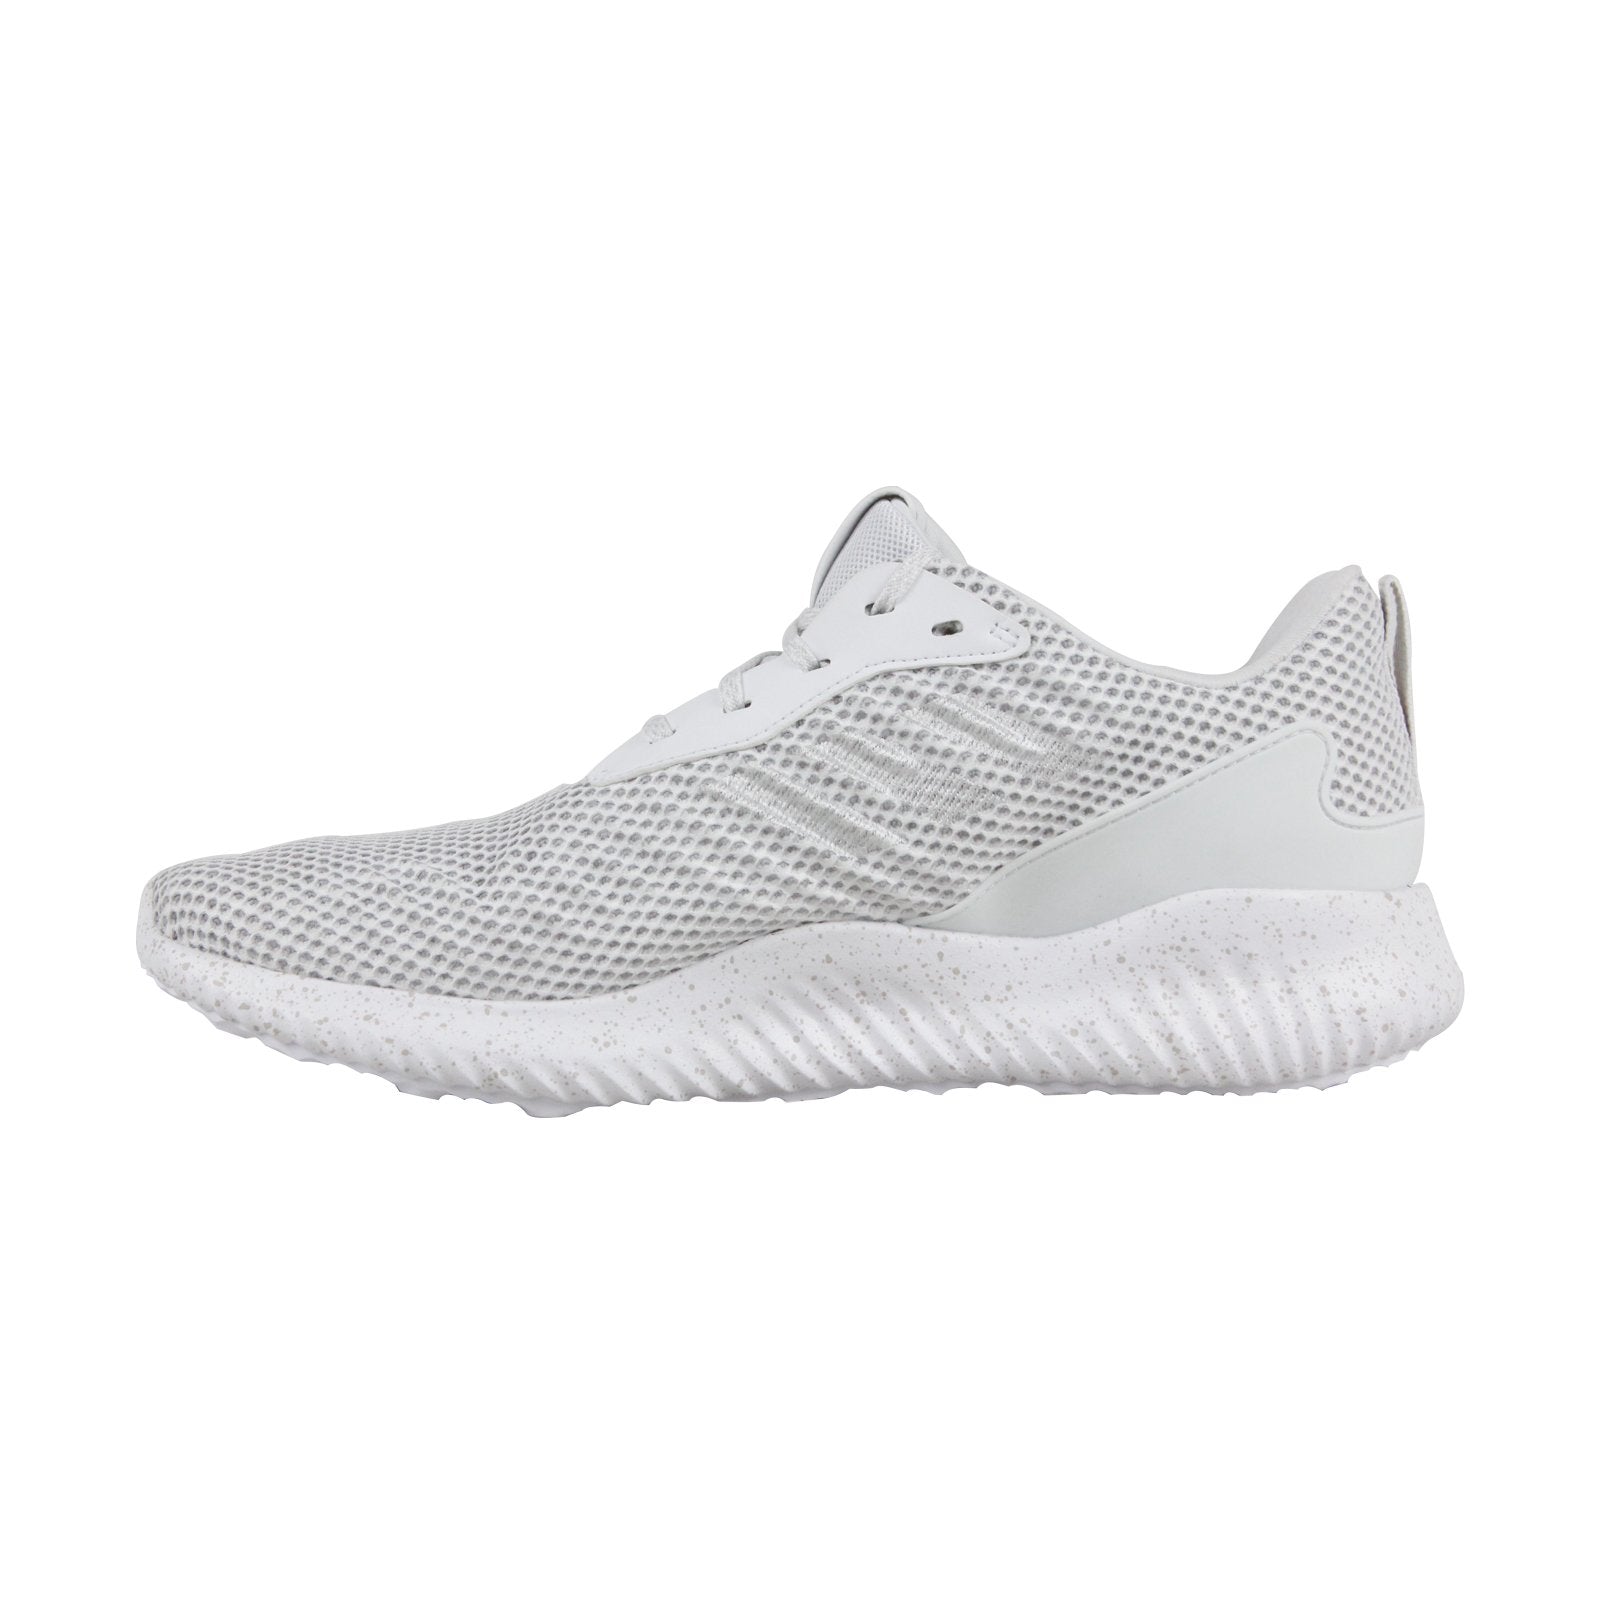 Adidas Alphabounce Rc Mens White Mesh Lace Up Athletic Running Ruze Shoes